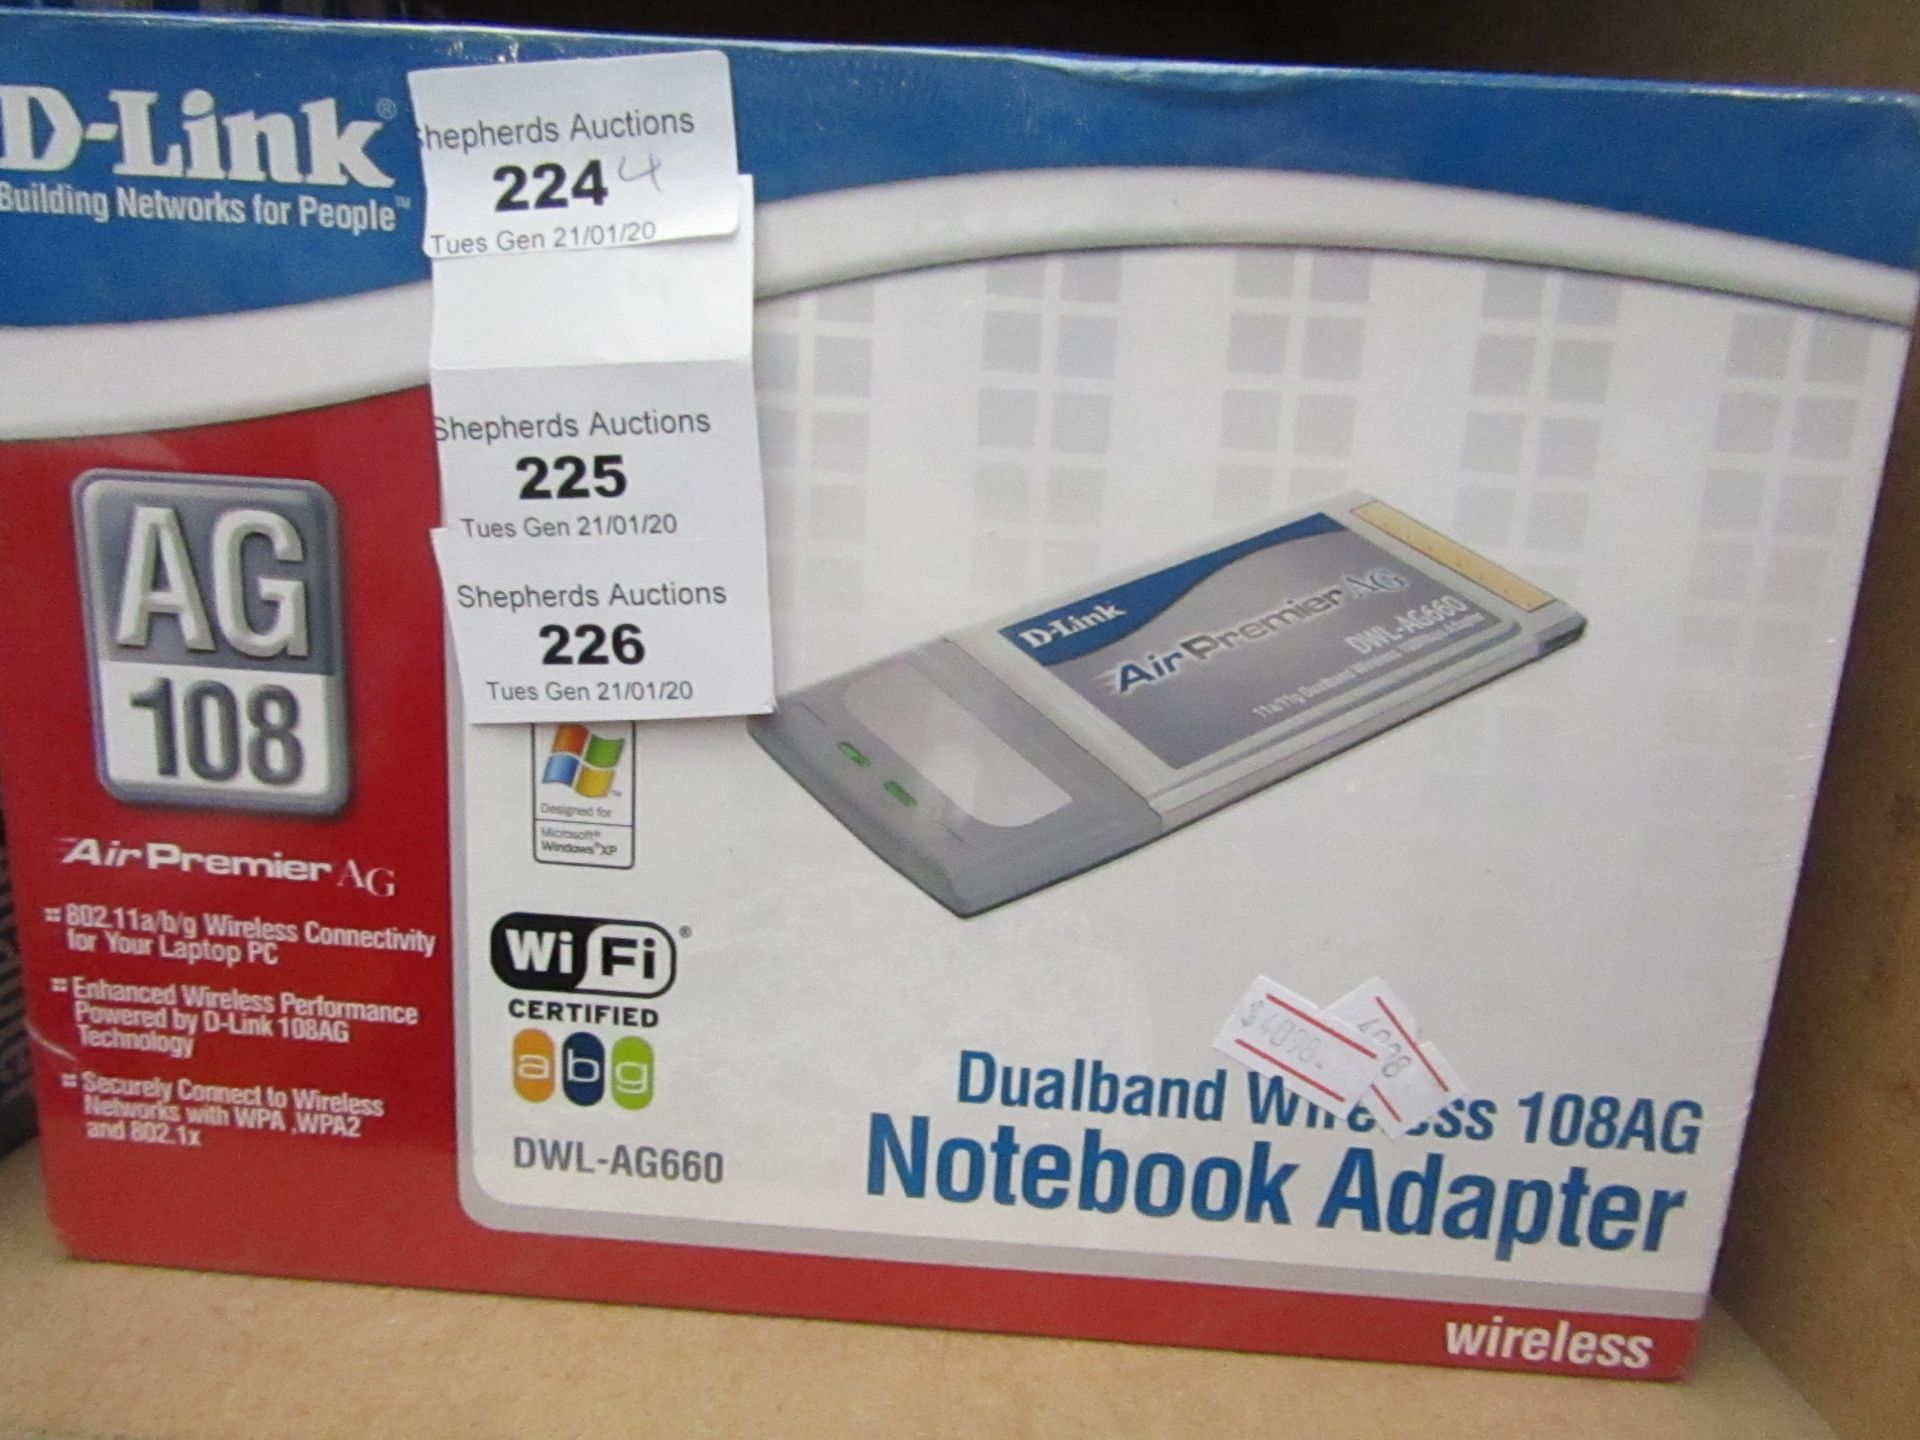 4X D-Link - DualBand Wireless 108AG Notebook adapter, Untested and boxed.